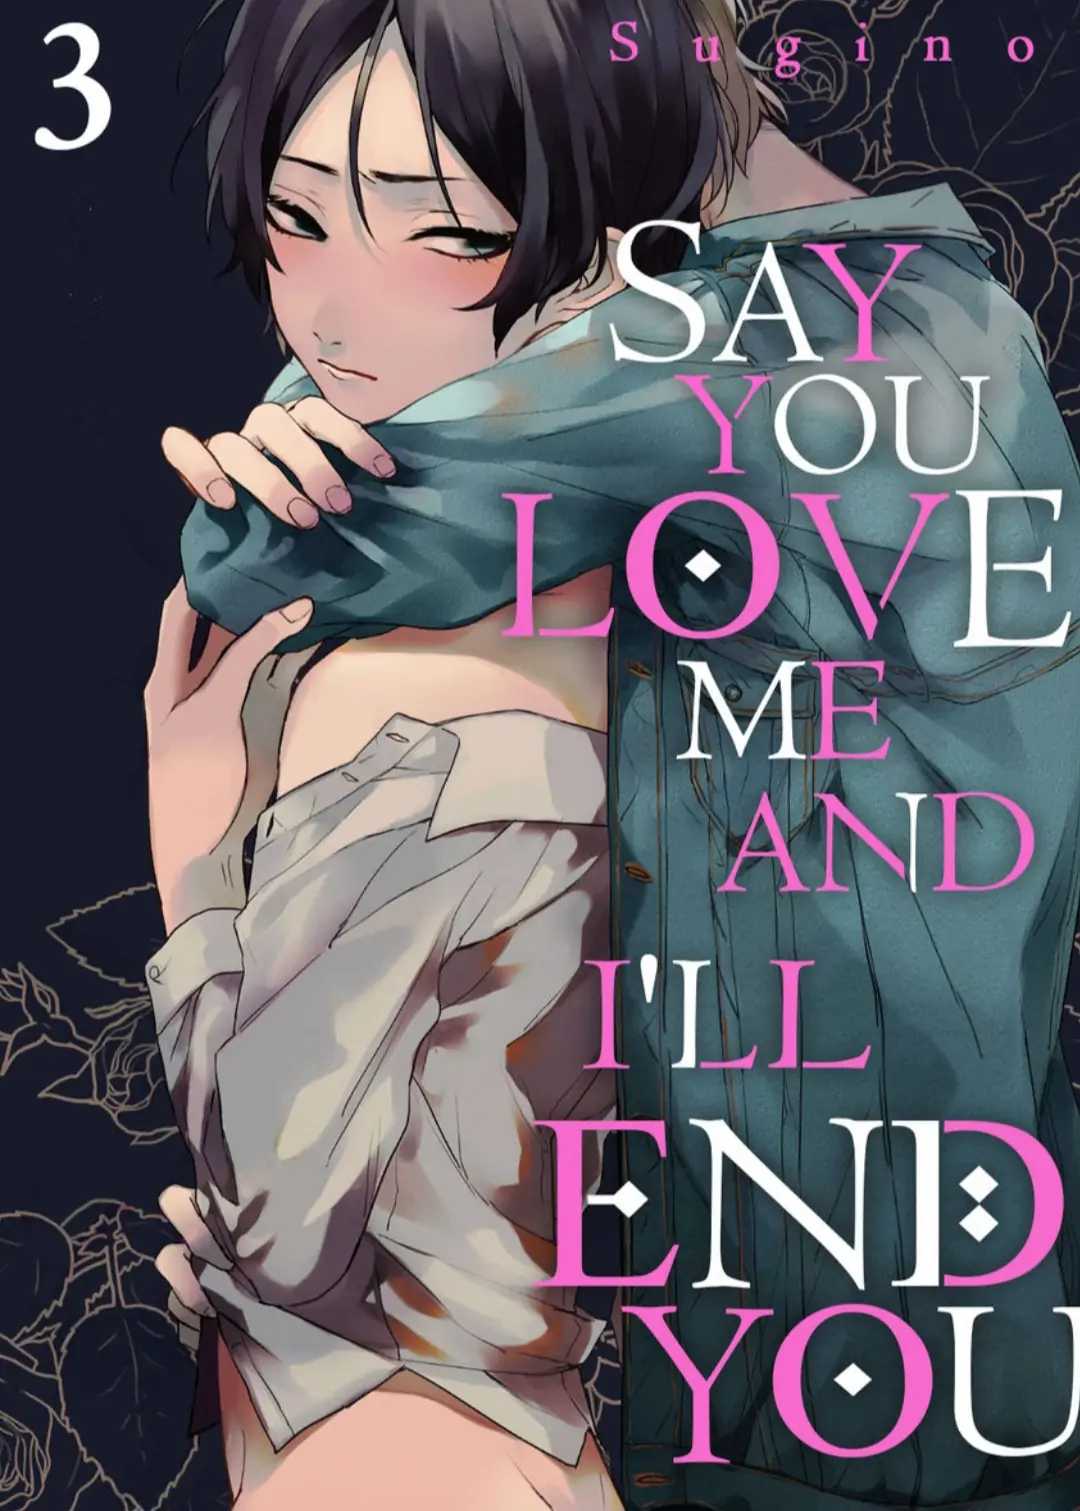 Say You Love Me And I'll End You - Page 2